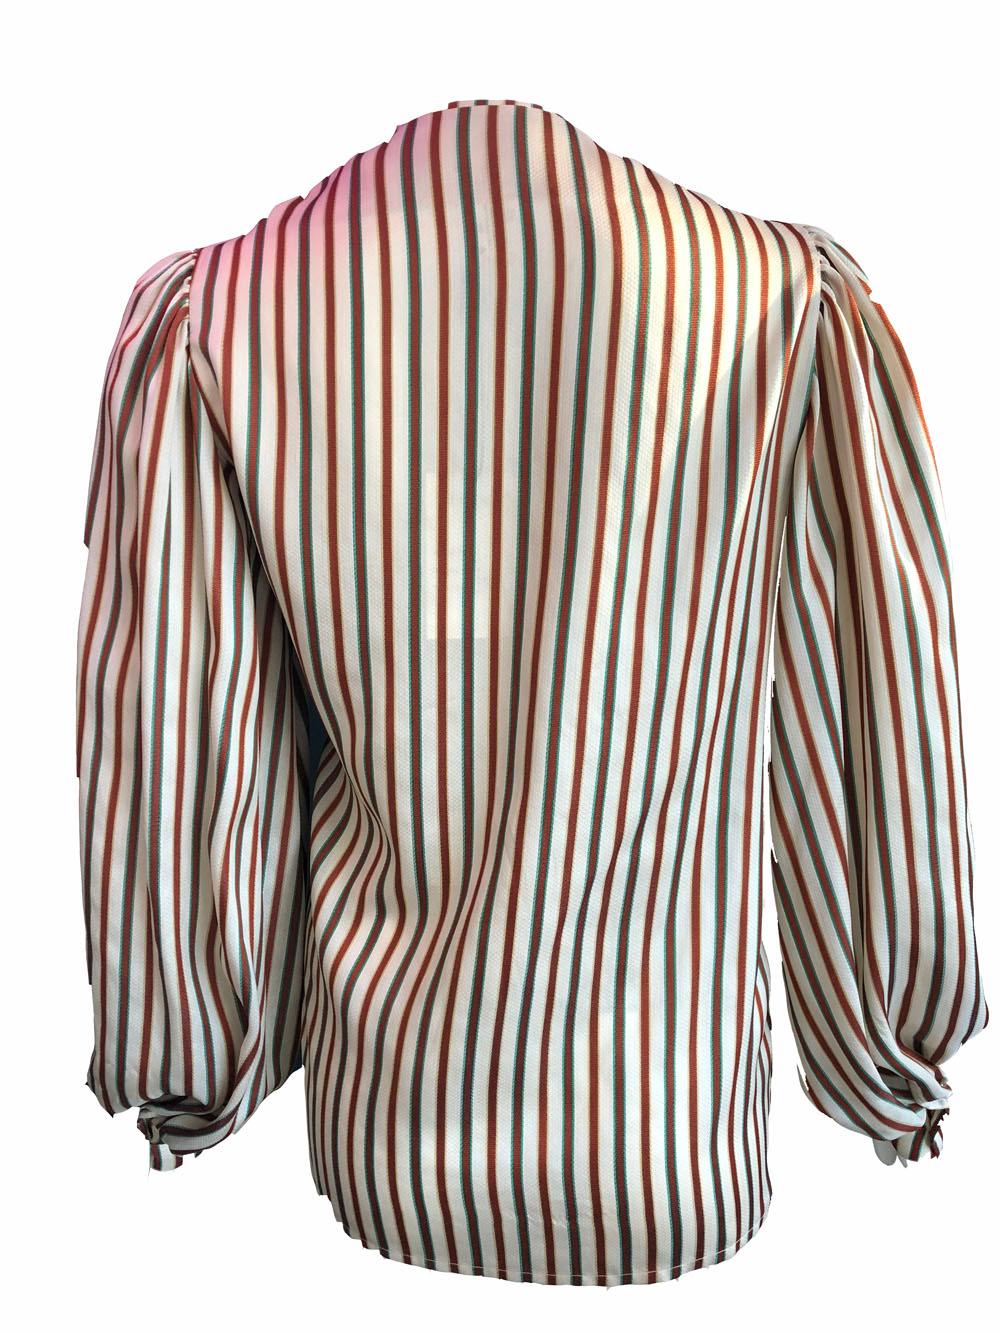 Striped boxy blouse by Hermes in cream with maroon, yellow and green stripes. Features puffy sleeves and v neck. Excellent condition.

100% silk

Size 38